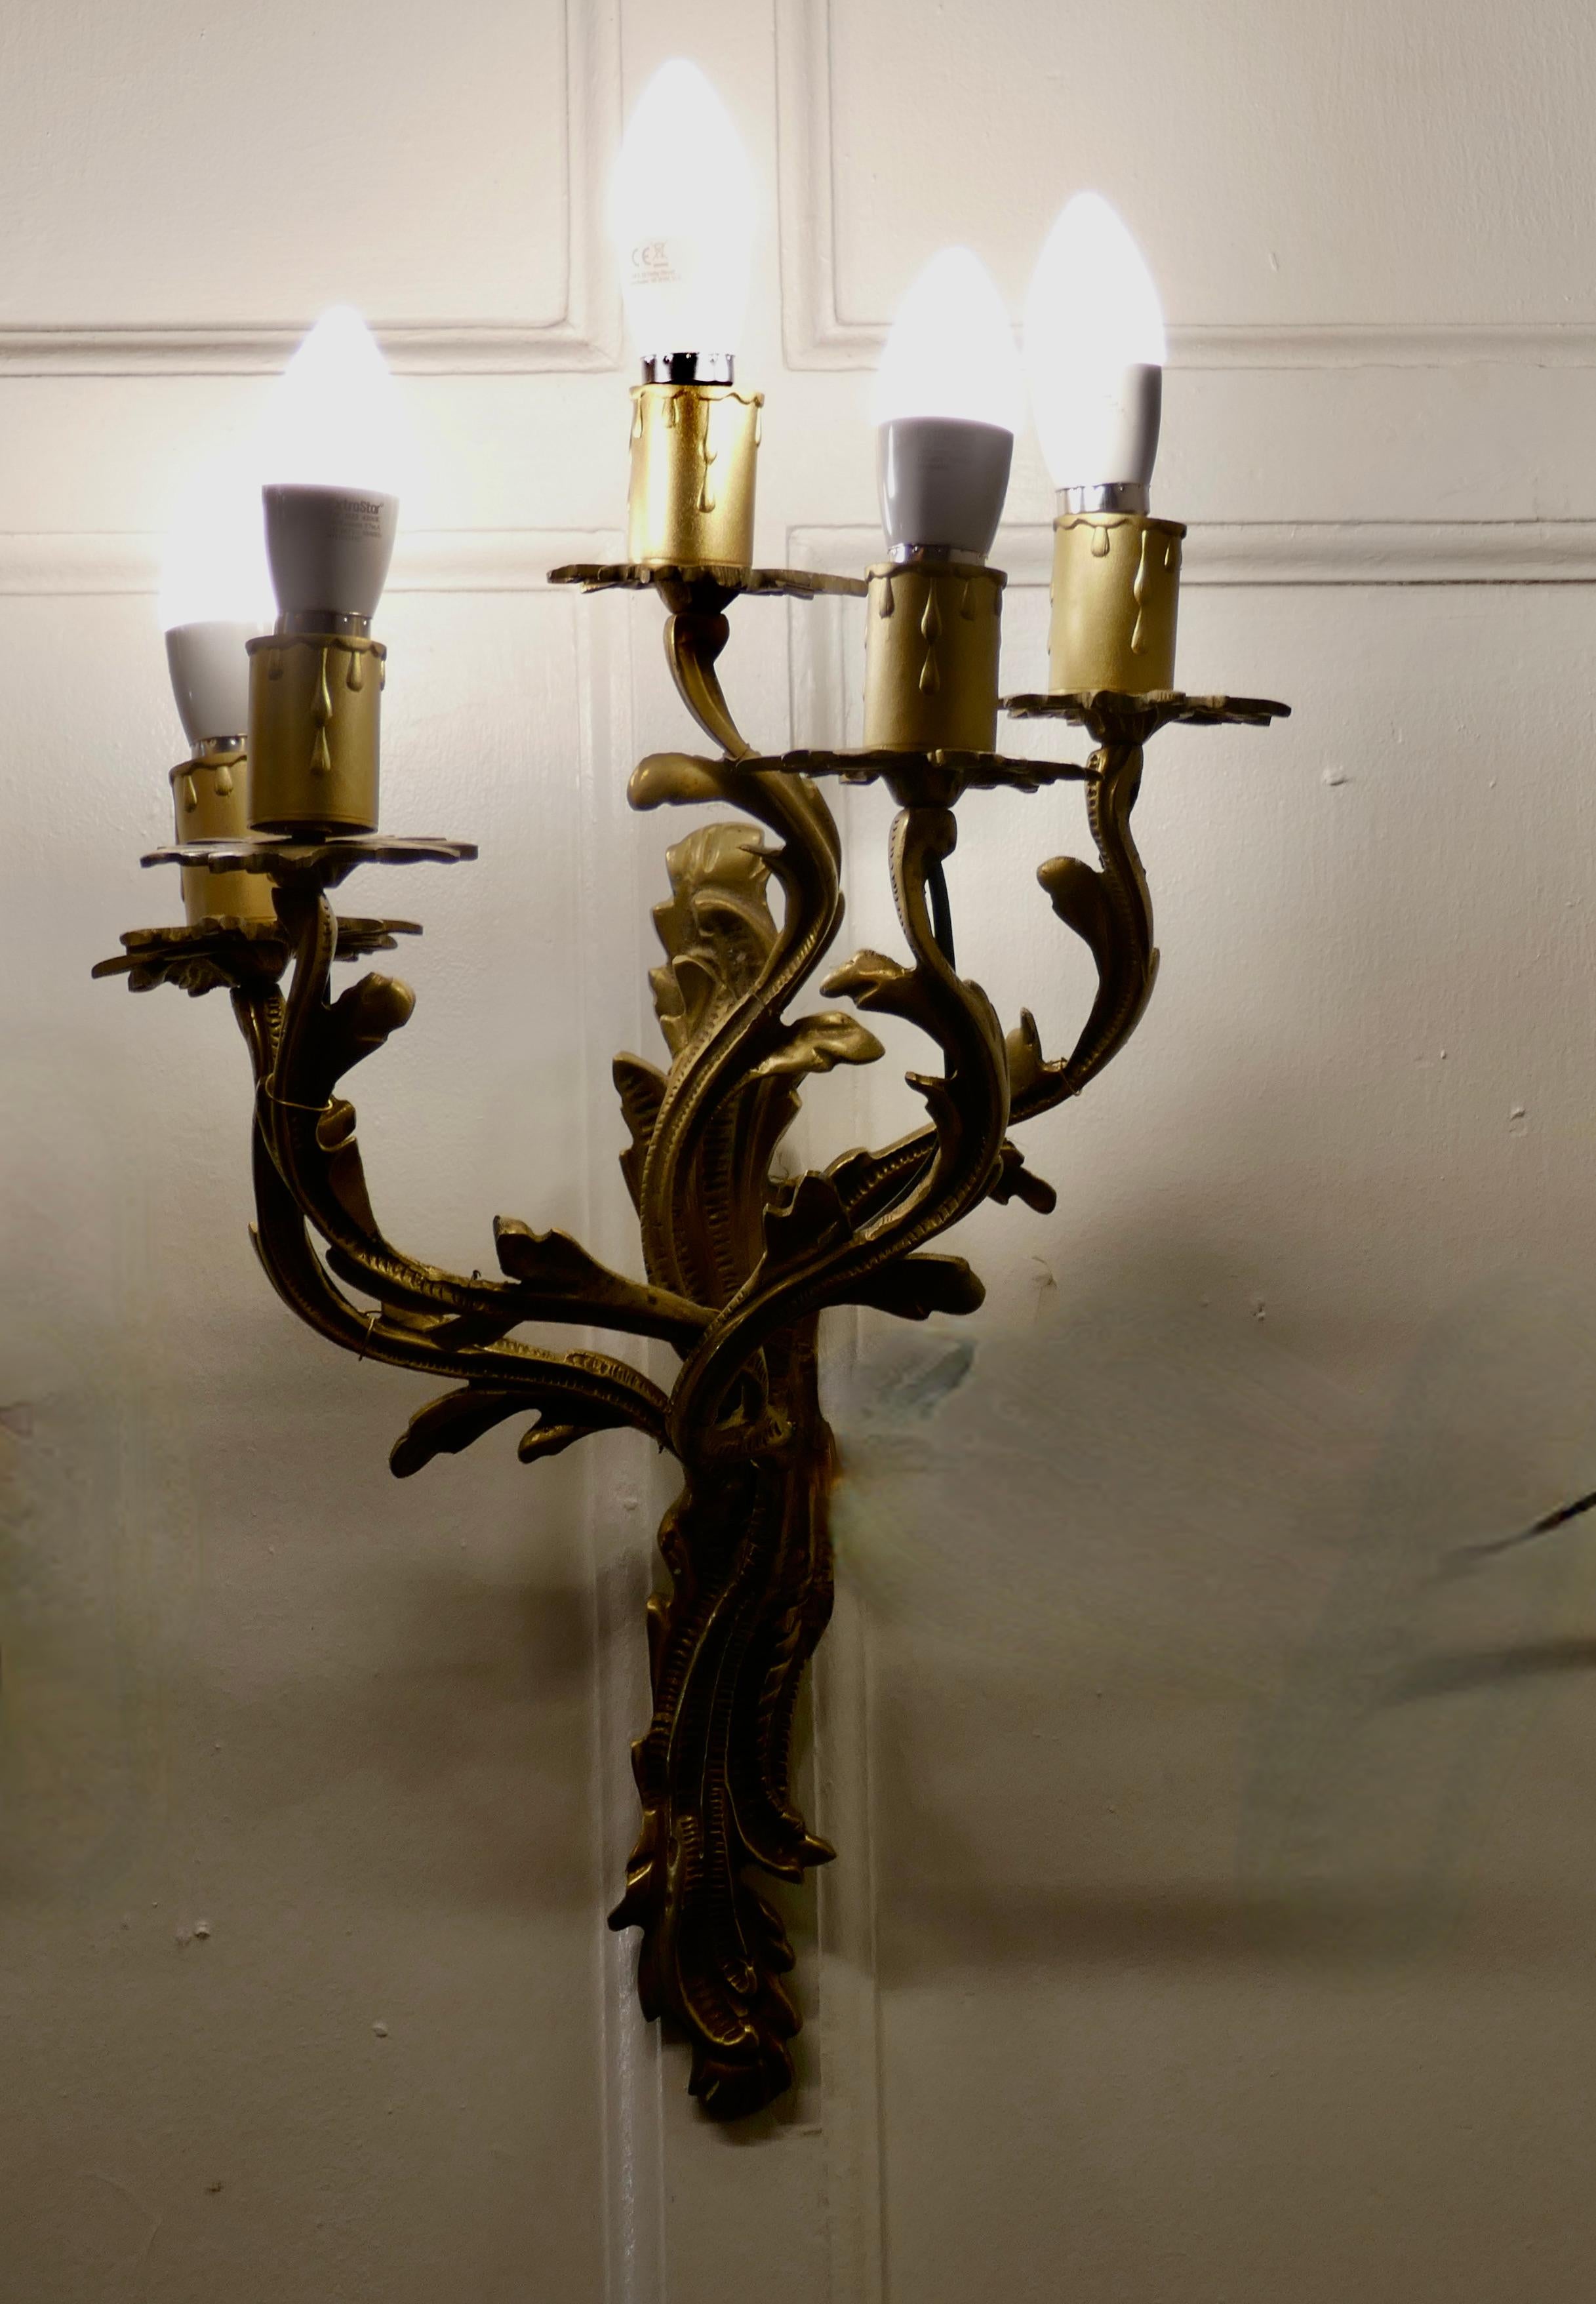 Set of large French brass 5 branch wall lights

A very handsome pair of large heavy brass wall lights, the lights are in the classical style of a twisted acanthus leaf scroll branches
Each light has 5 branches each with a sconce and candle